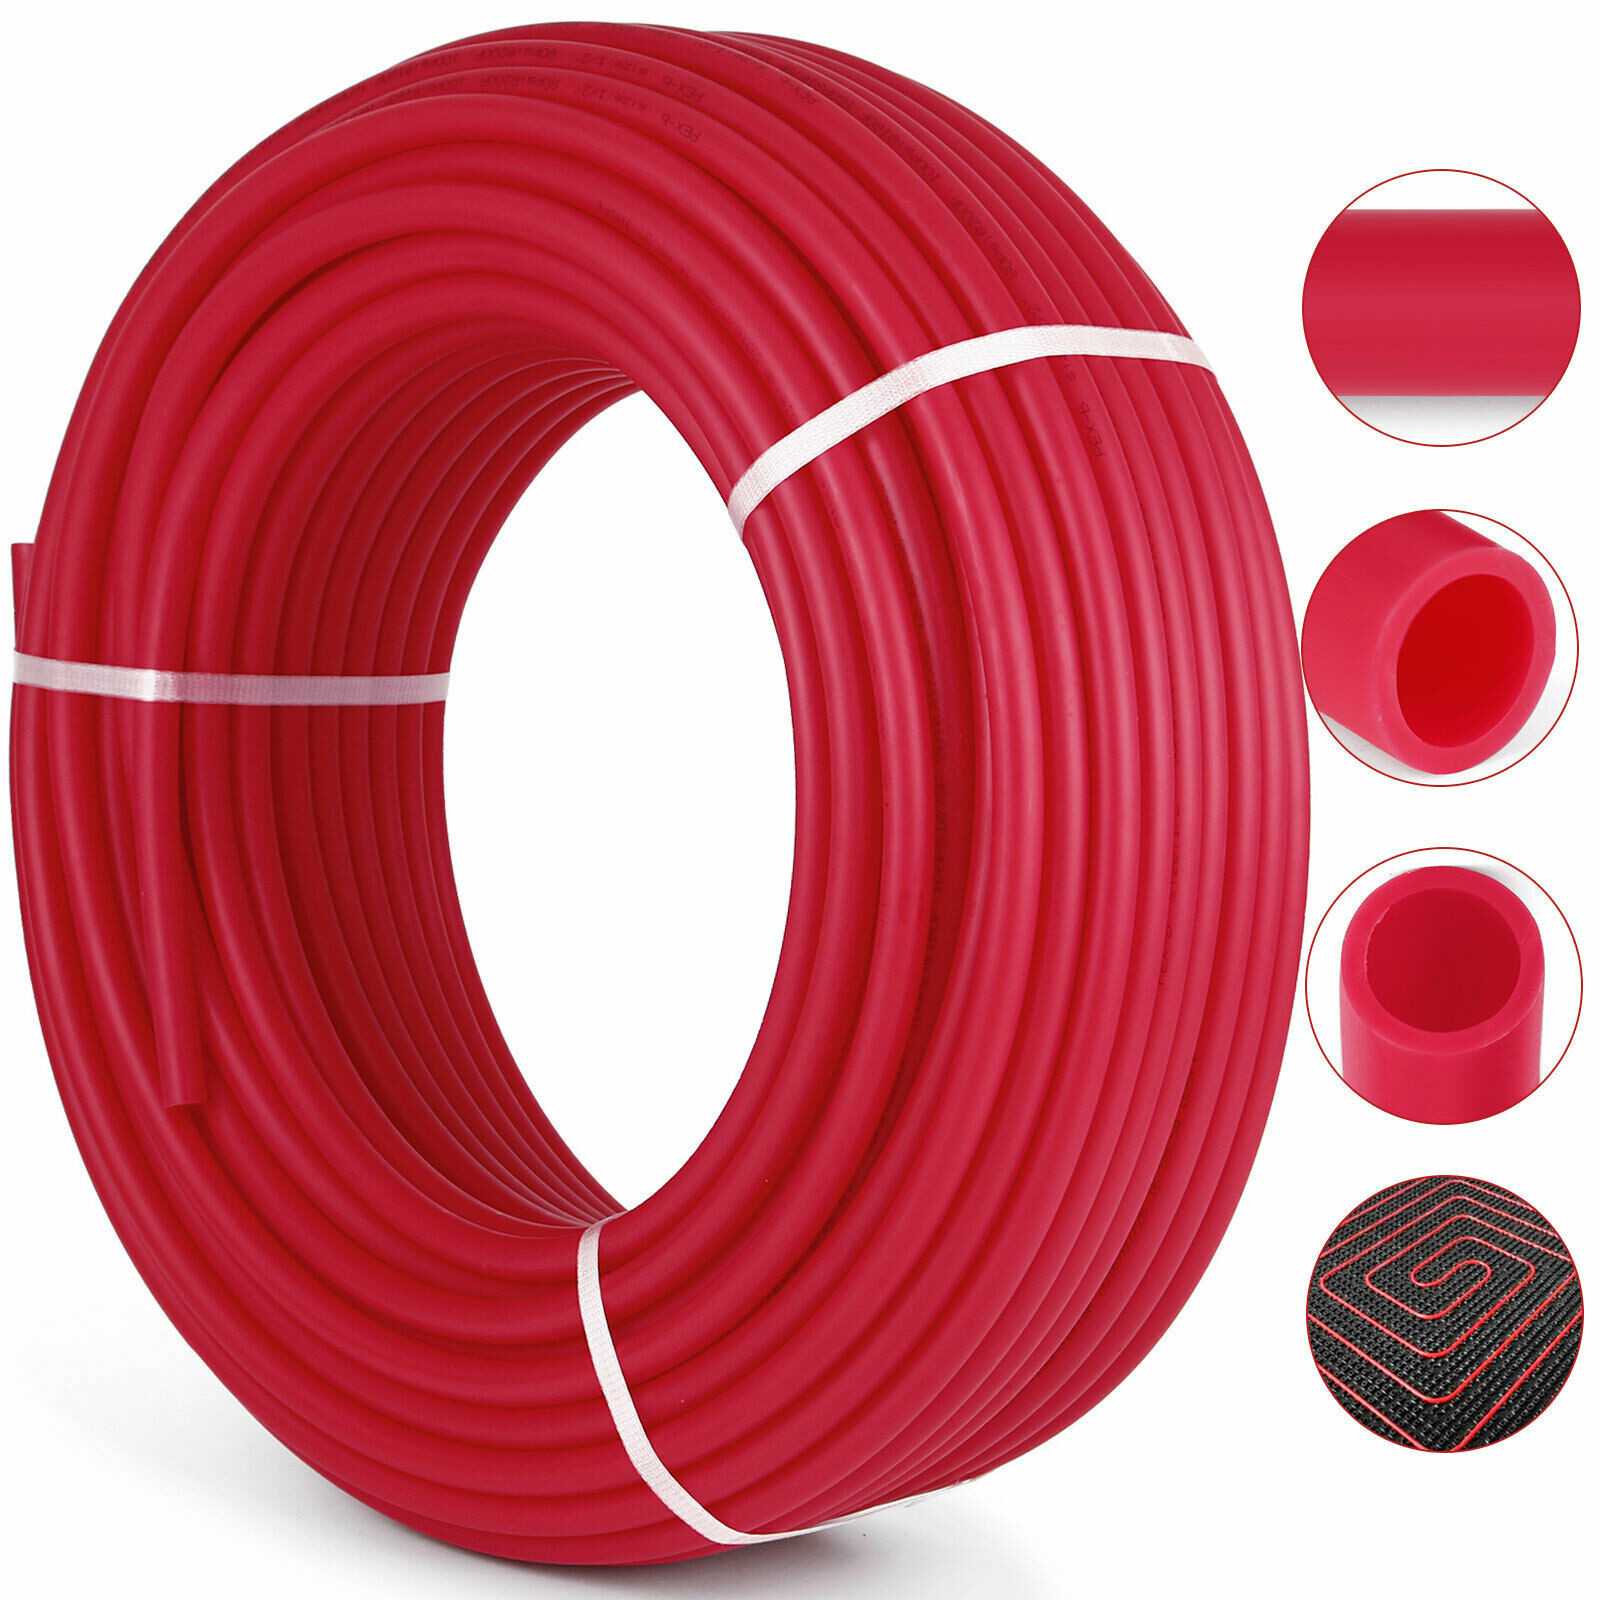 3/4" X 100 ft RED PEX TUBING FOR WATER SUPPLY WITH 25 YEARS WARRANTY